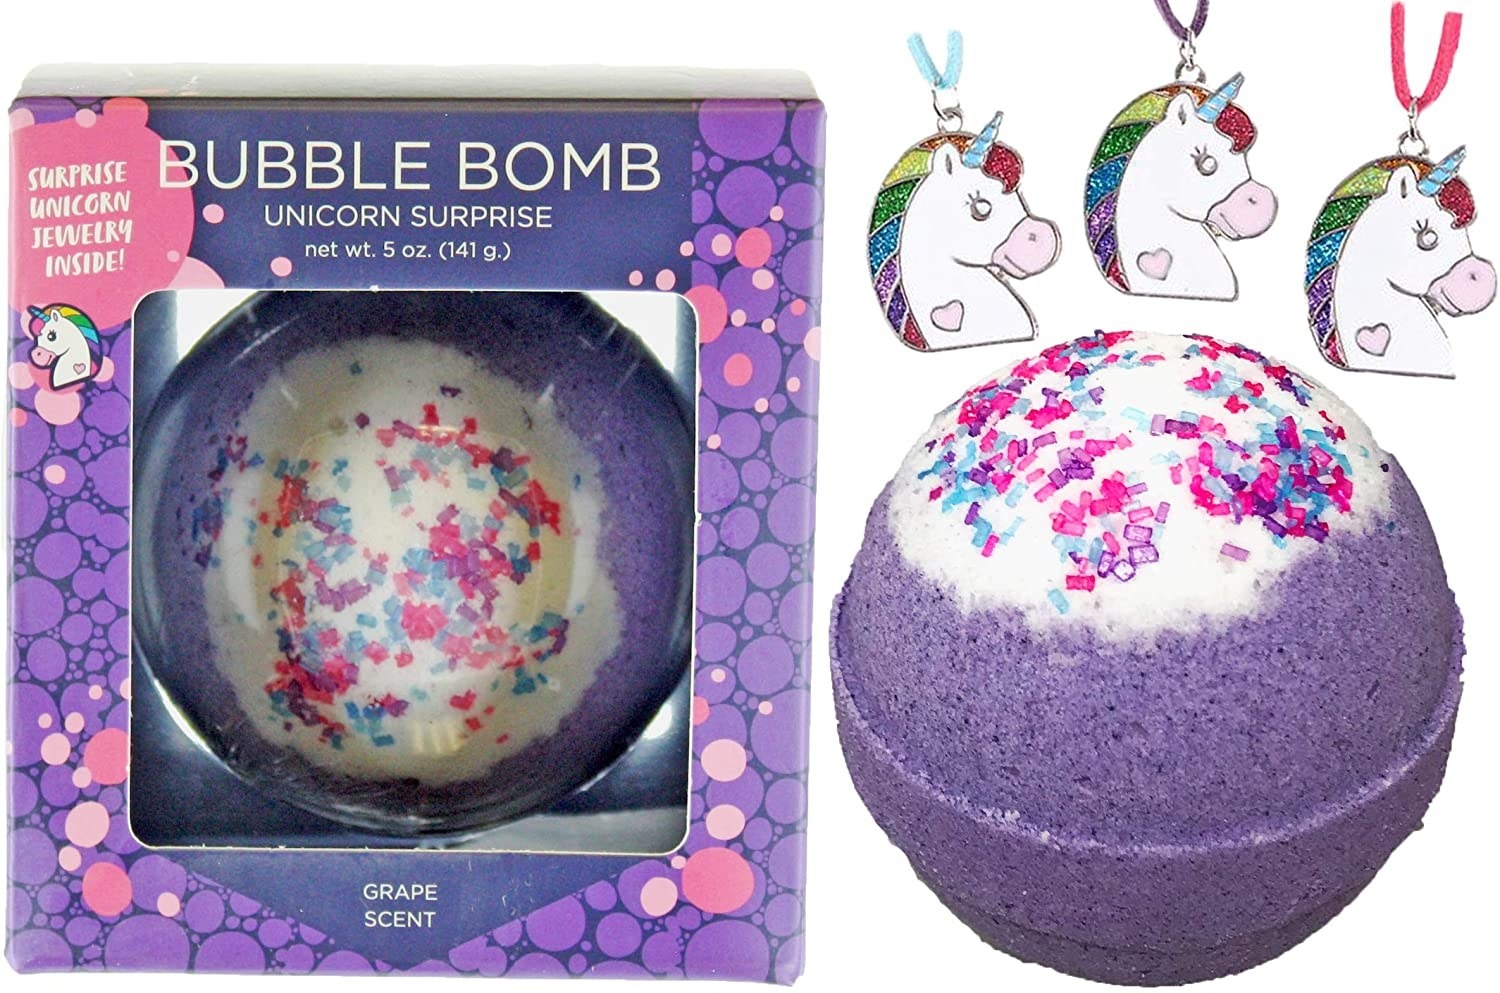 the purple bath bomb topped with sprinkles and three unicorn charms